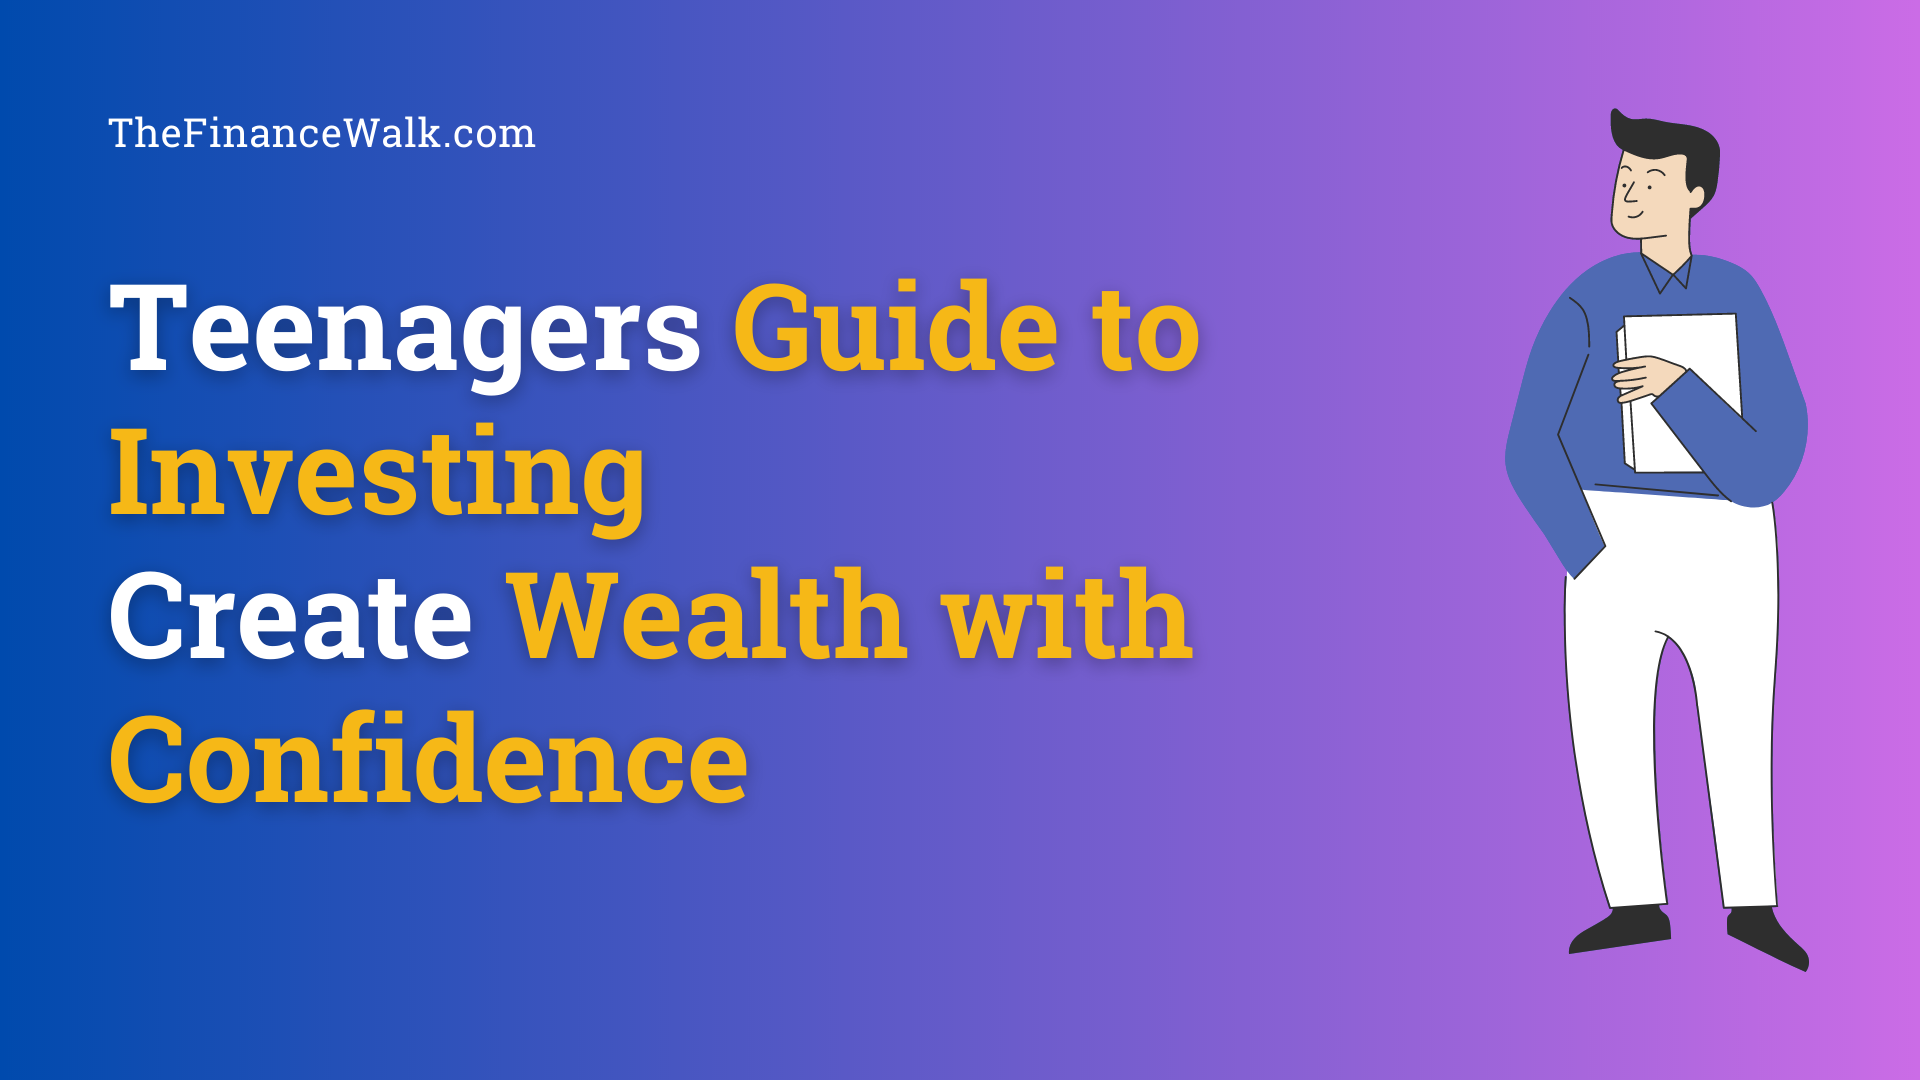 Teenagers Guide to Investing Create Wealth with Confidence